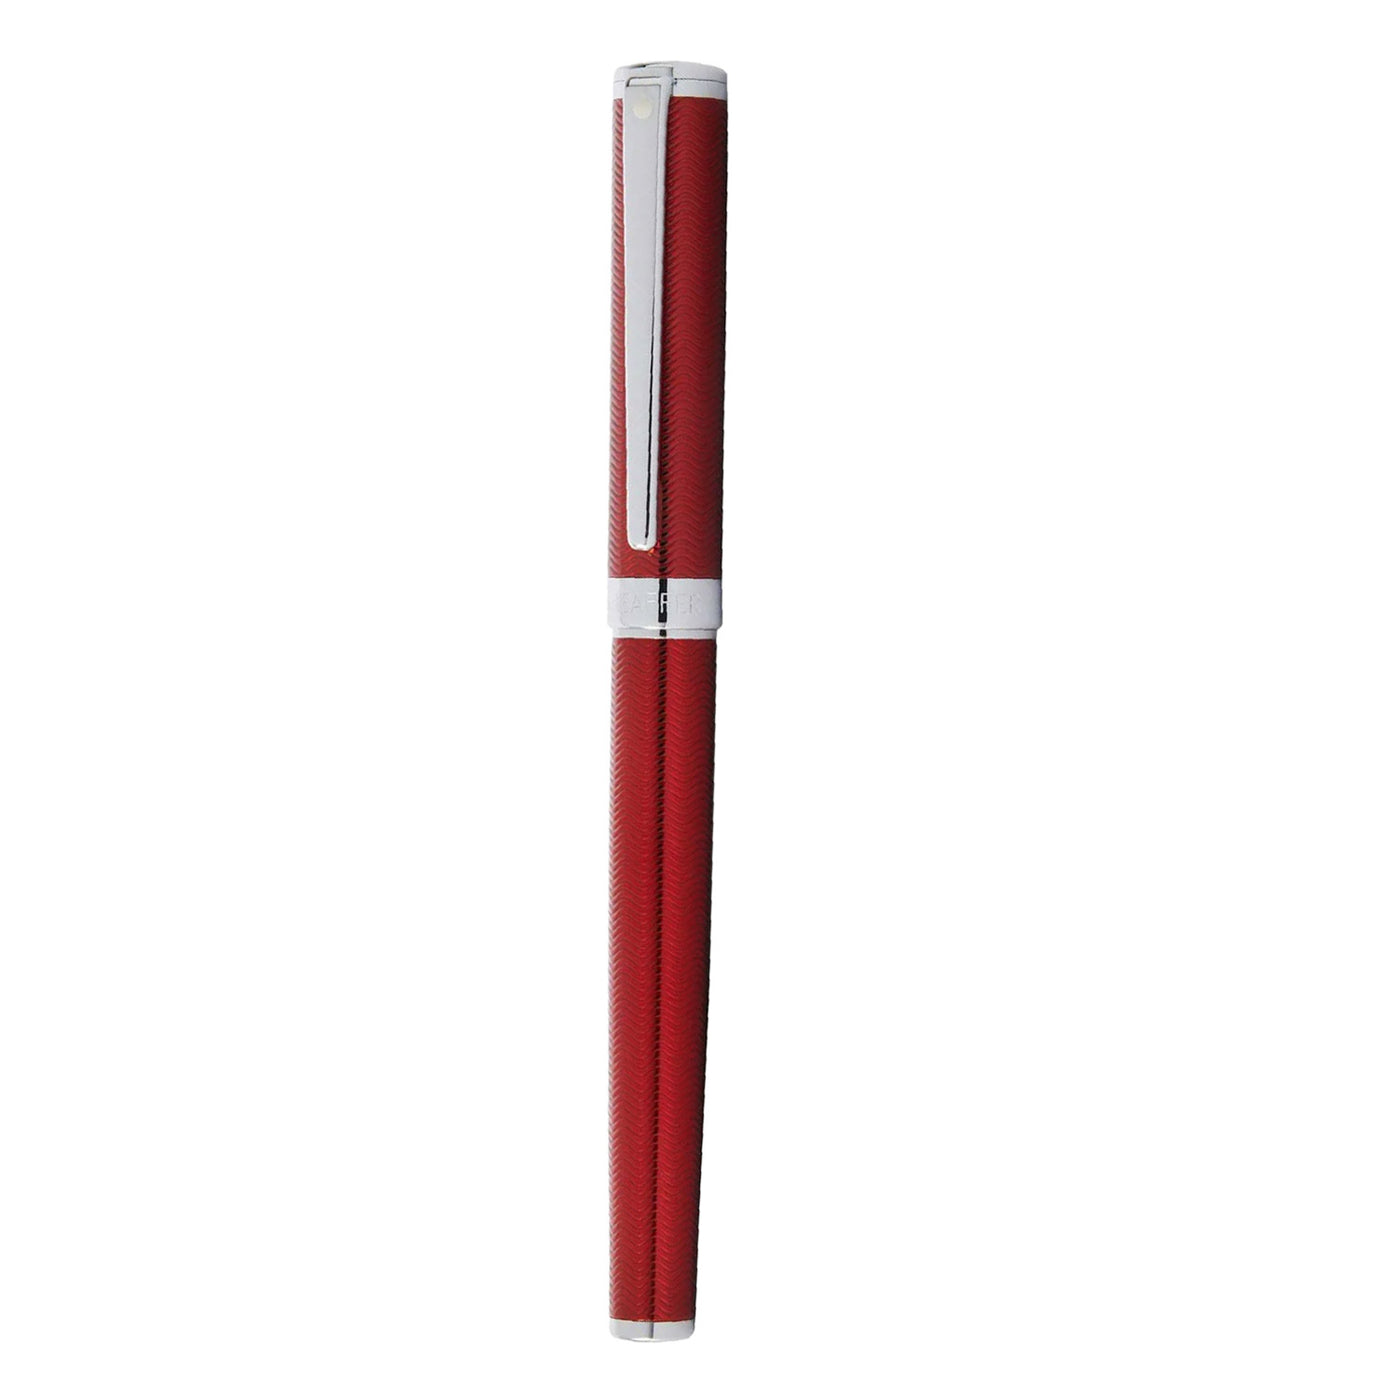 Sheaffer Intensity Fountain Pen - Translucent Red CT 4